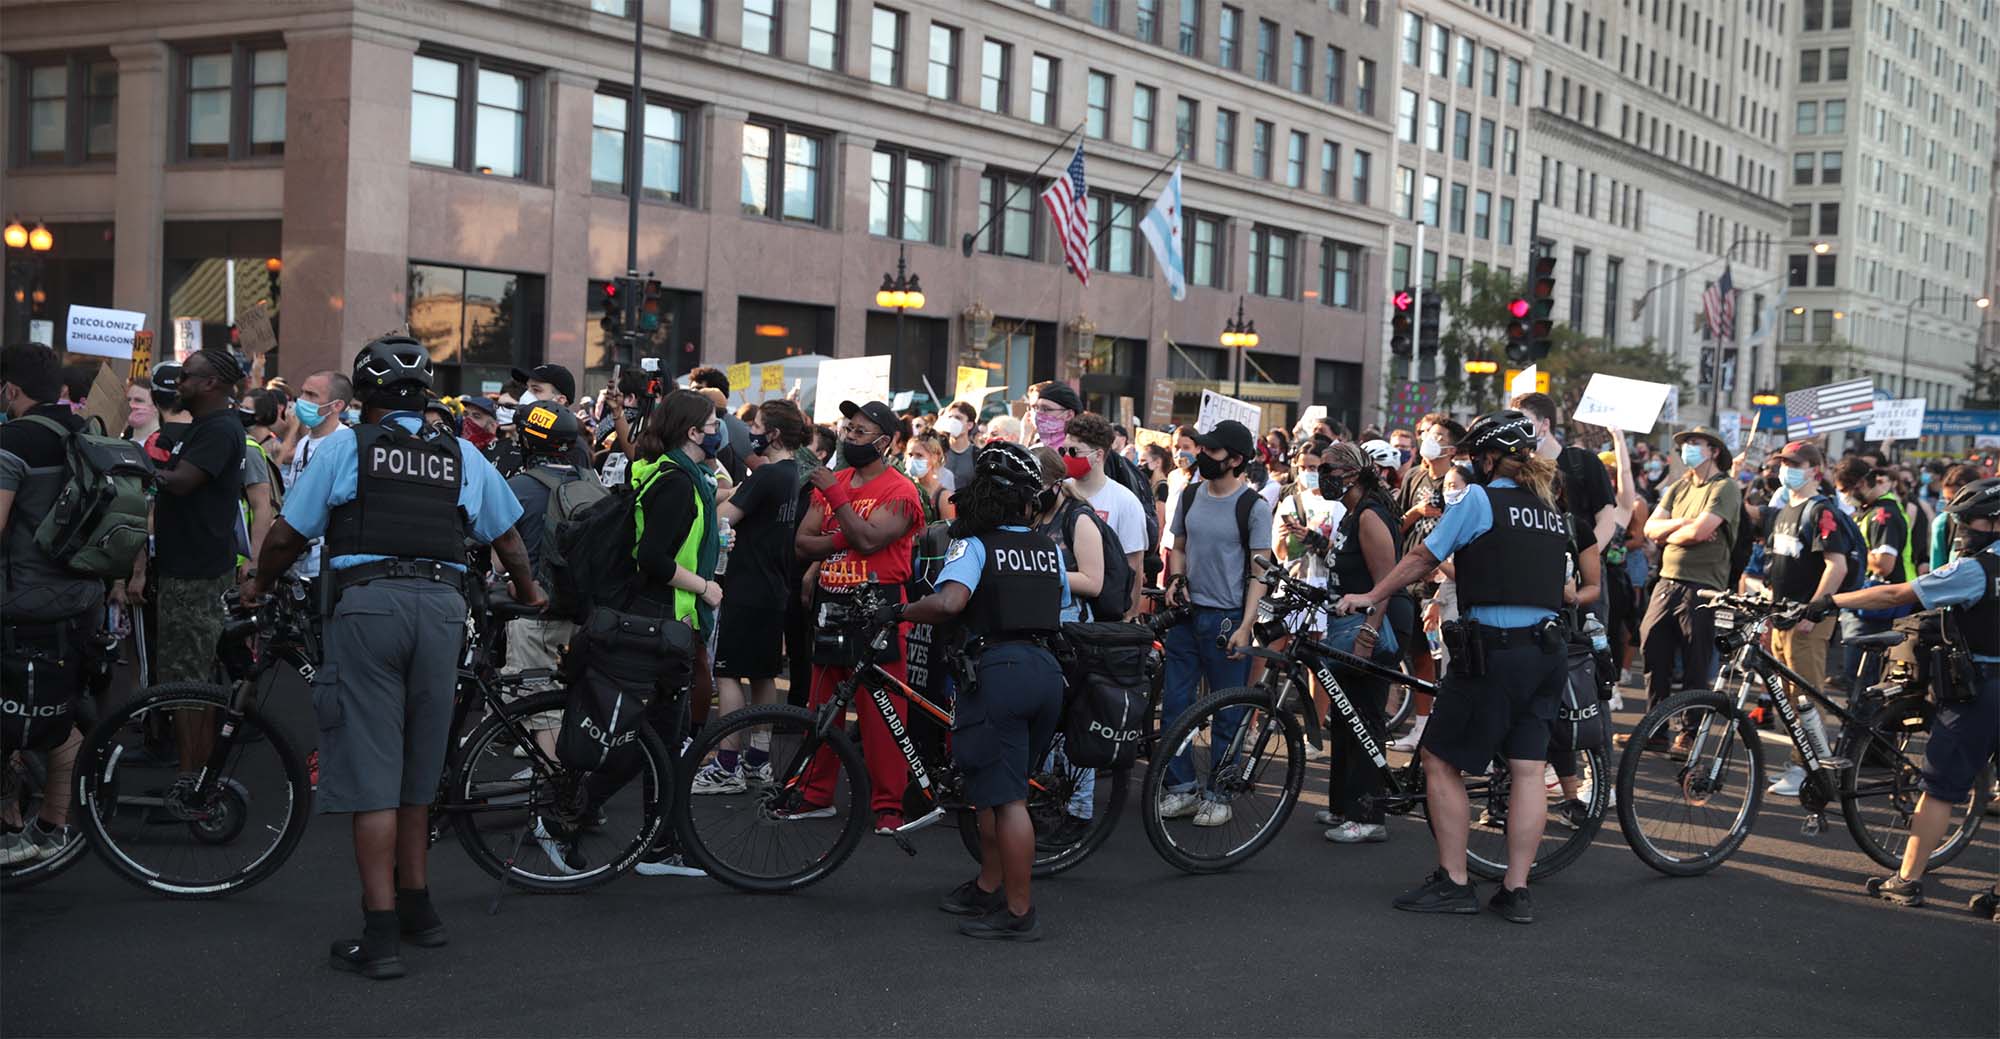 Police holding bicycles block the path of demonstrators as they march through downtown Chicago, Illinois. 